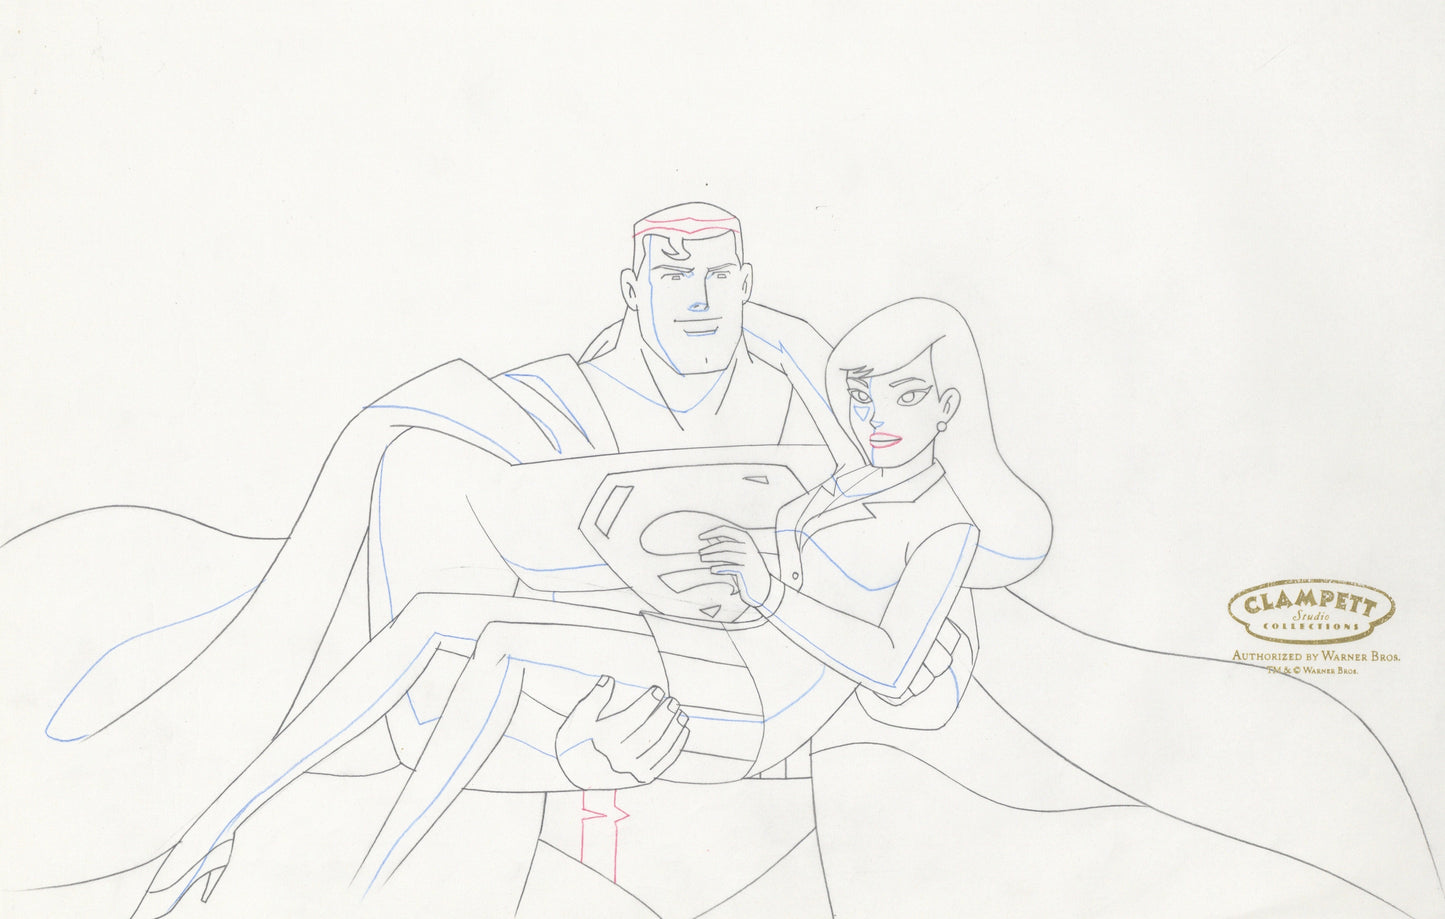 Justice League Original Production Drawing: Superman and Lois Lane